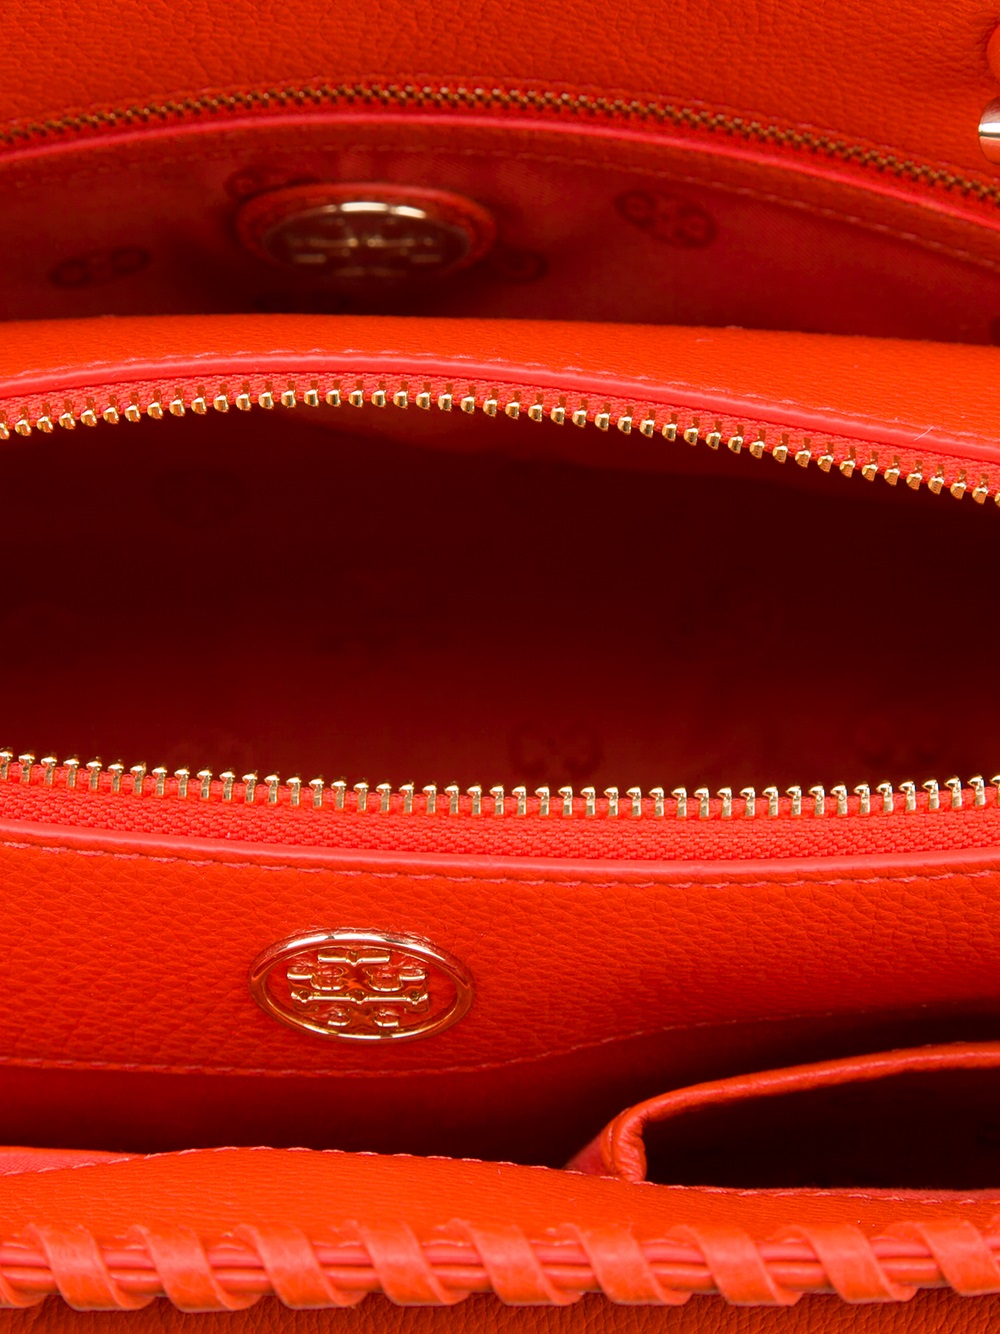 Lyst - Tory Burch Large Marion Boxy Satchel in Orange